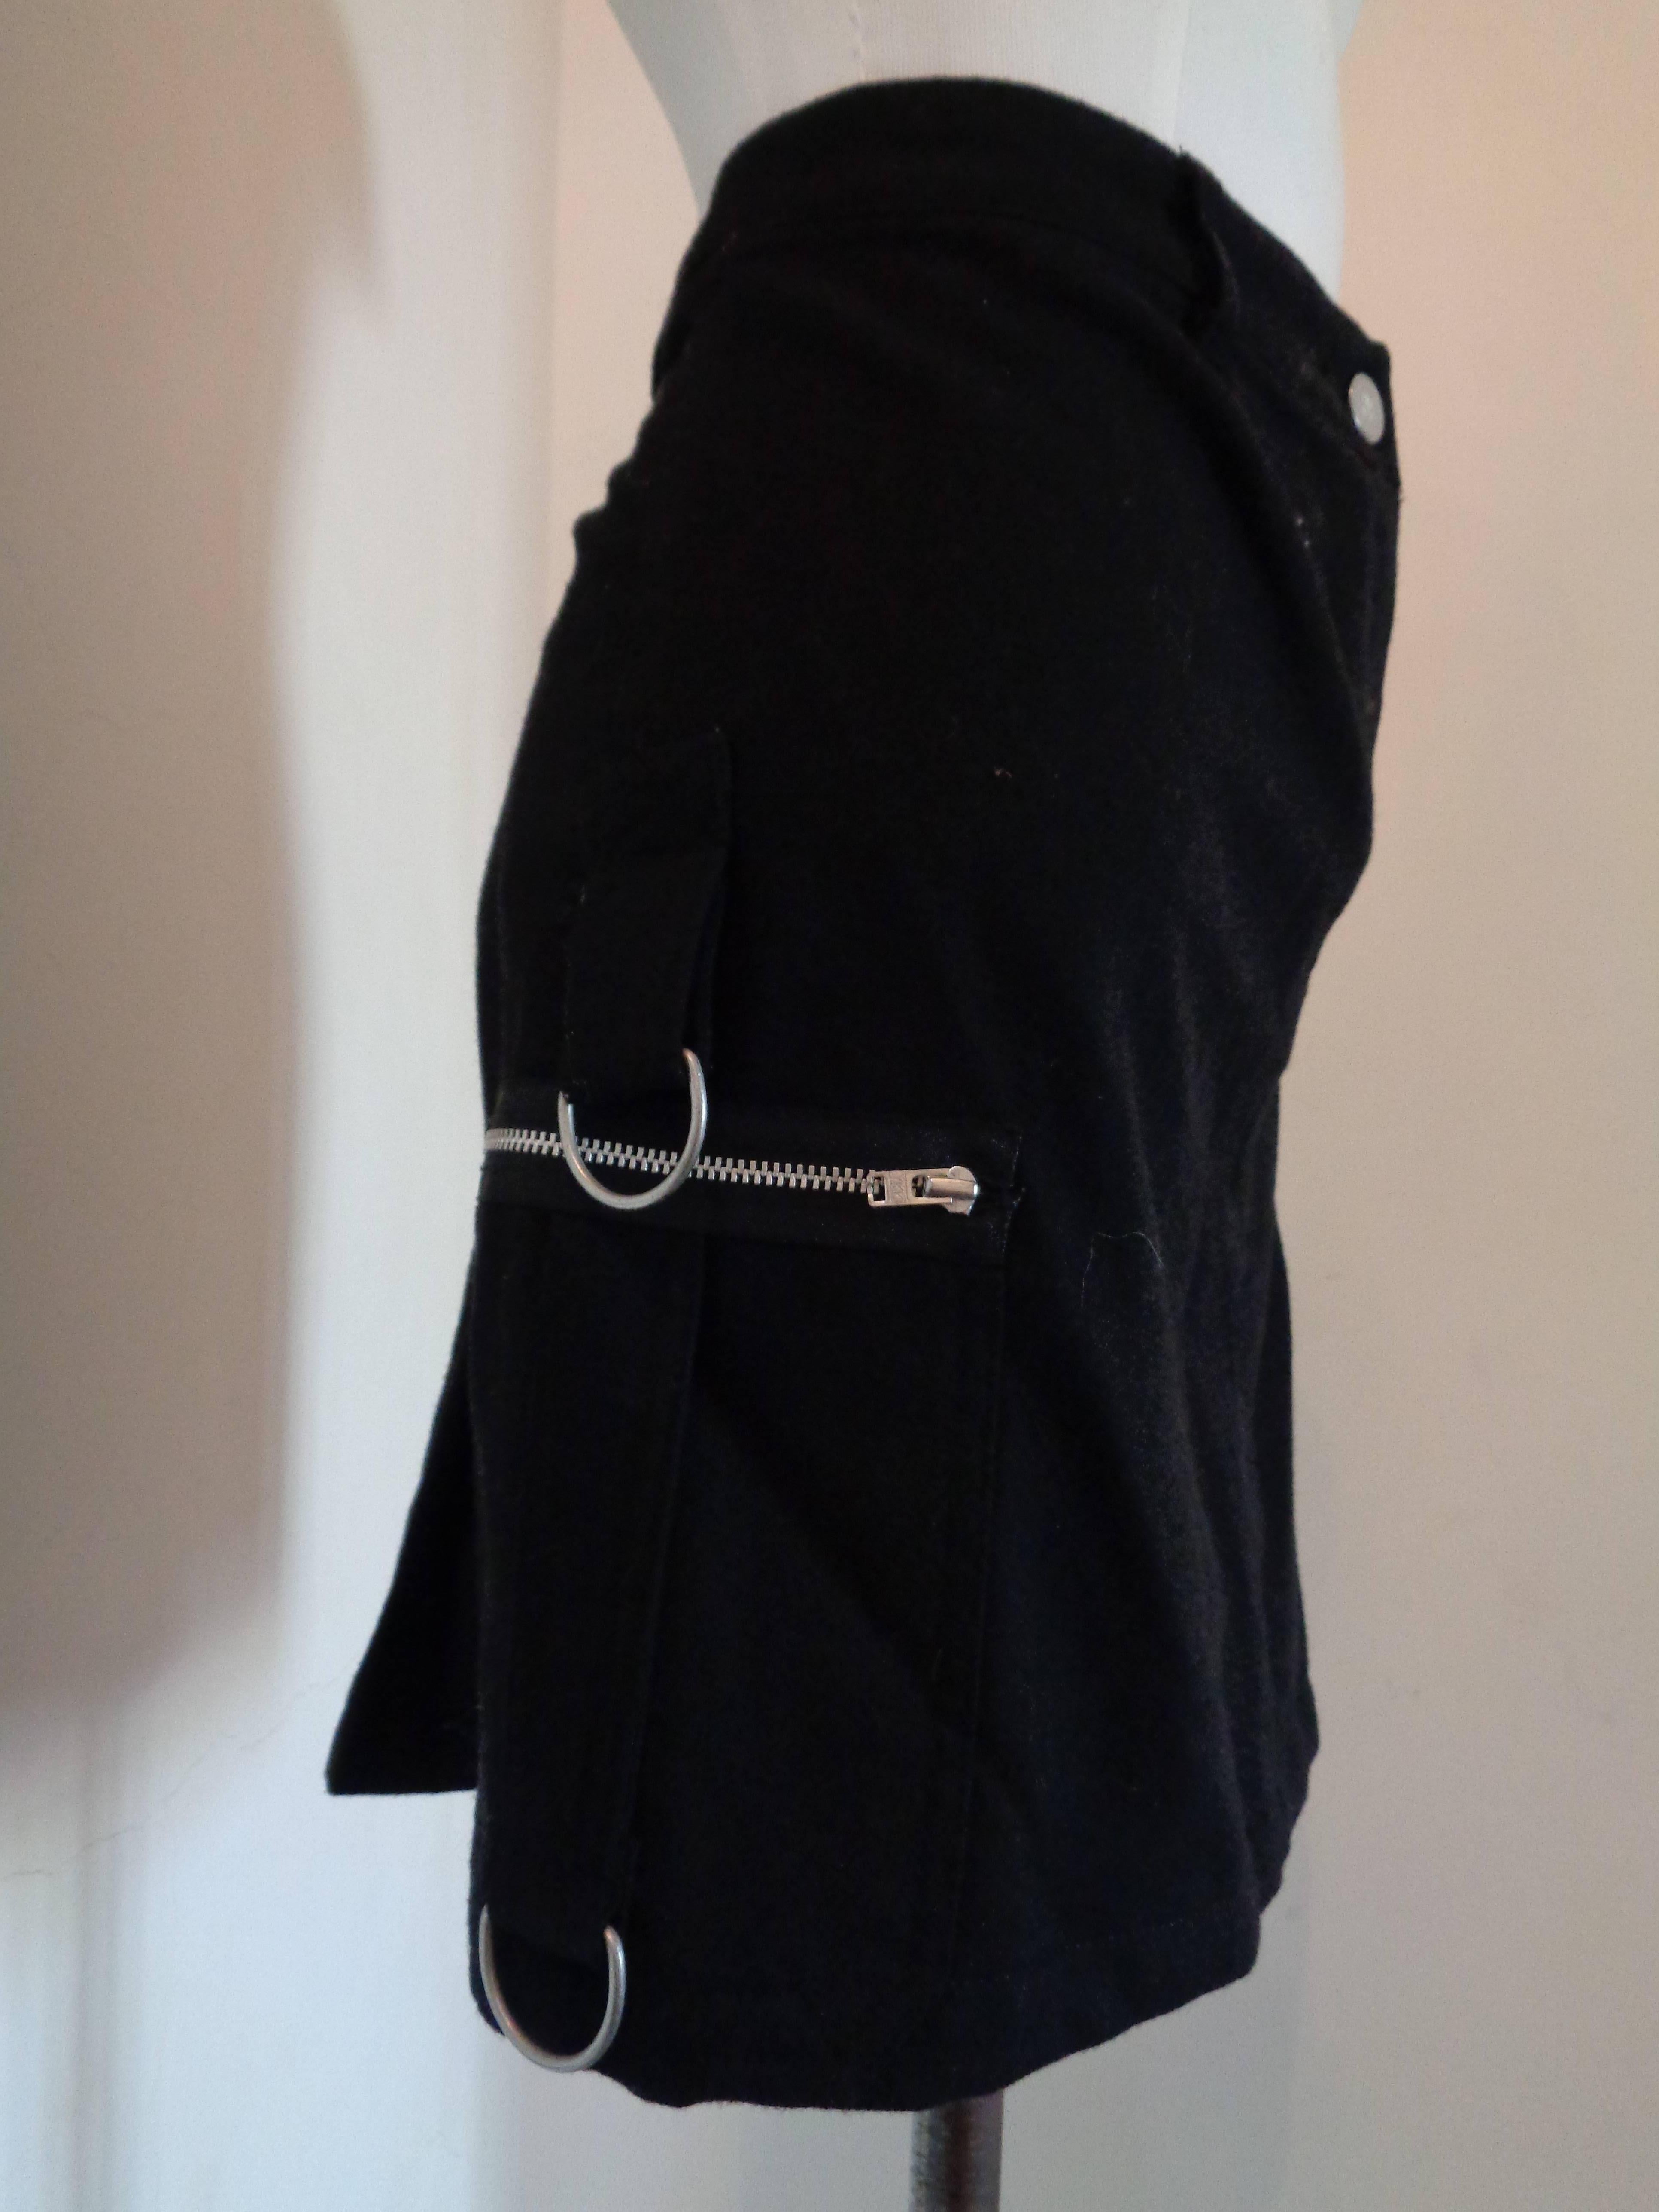 J.C de Castelbajac black Wool Skirt

Totally made in italy in size 42

Composition: Wool and polyestere